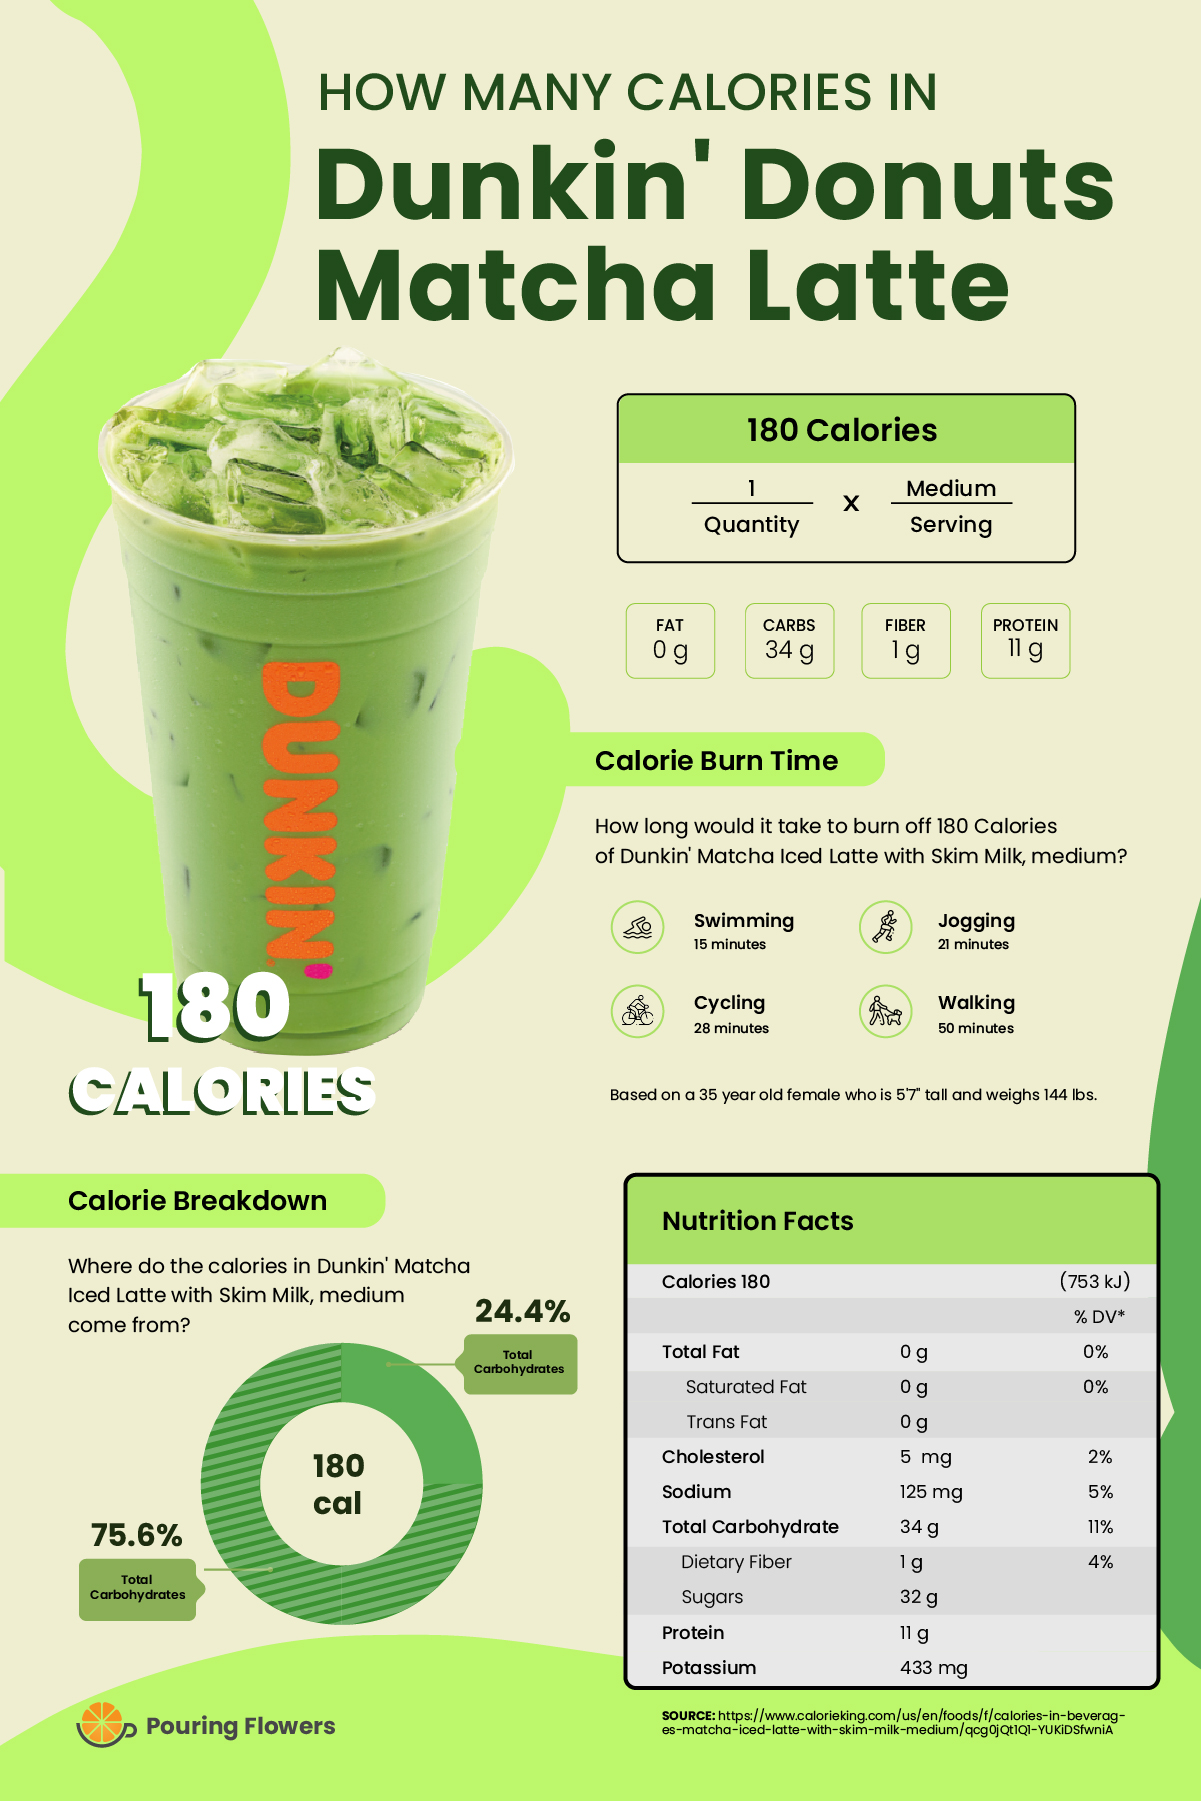 Amount of calories in Dunkin Donuts Matcha Latte